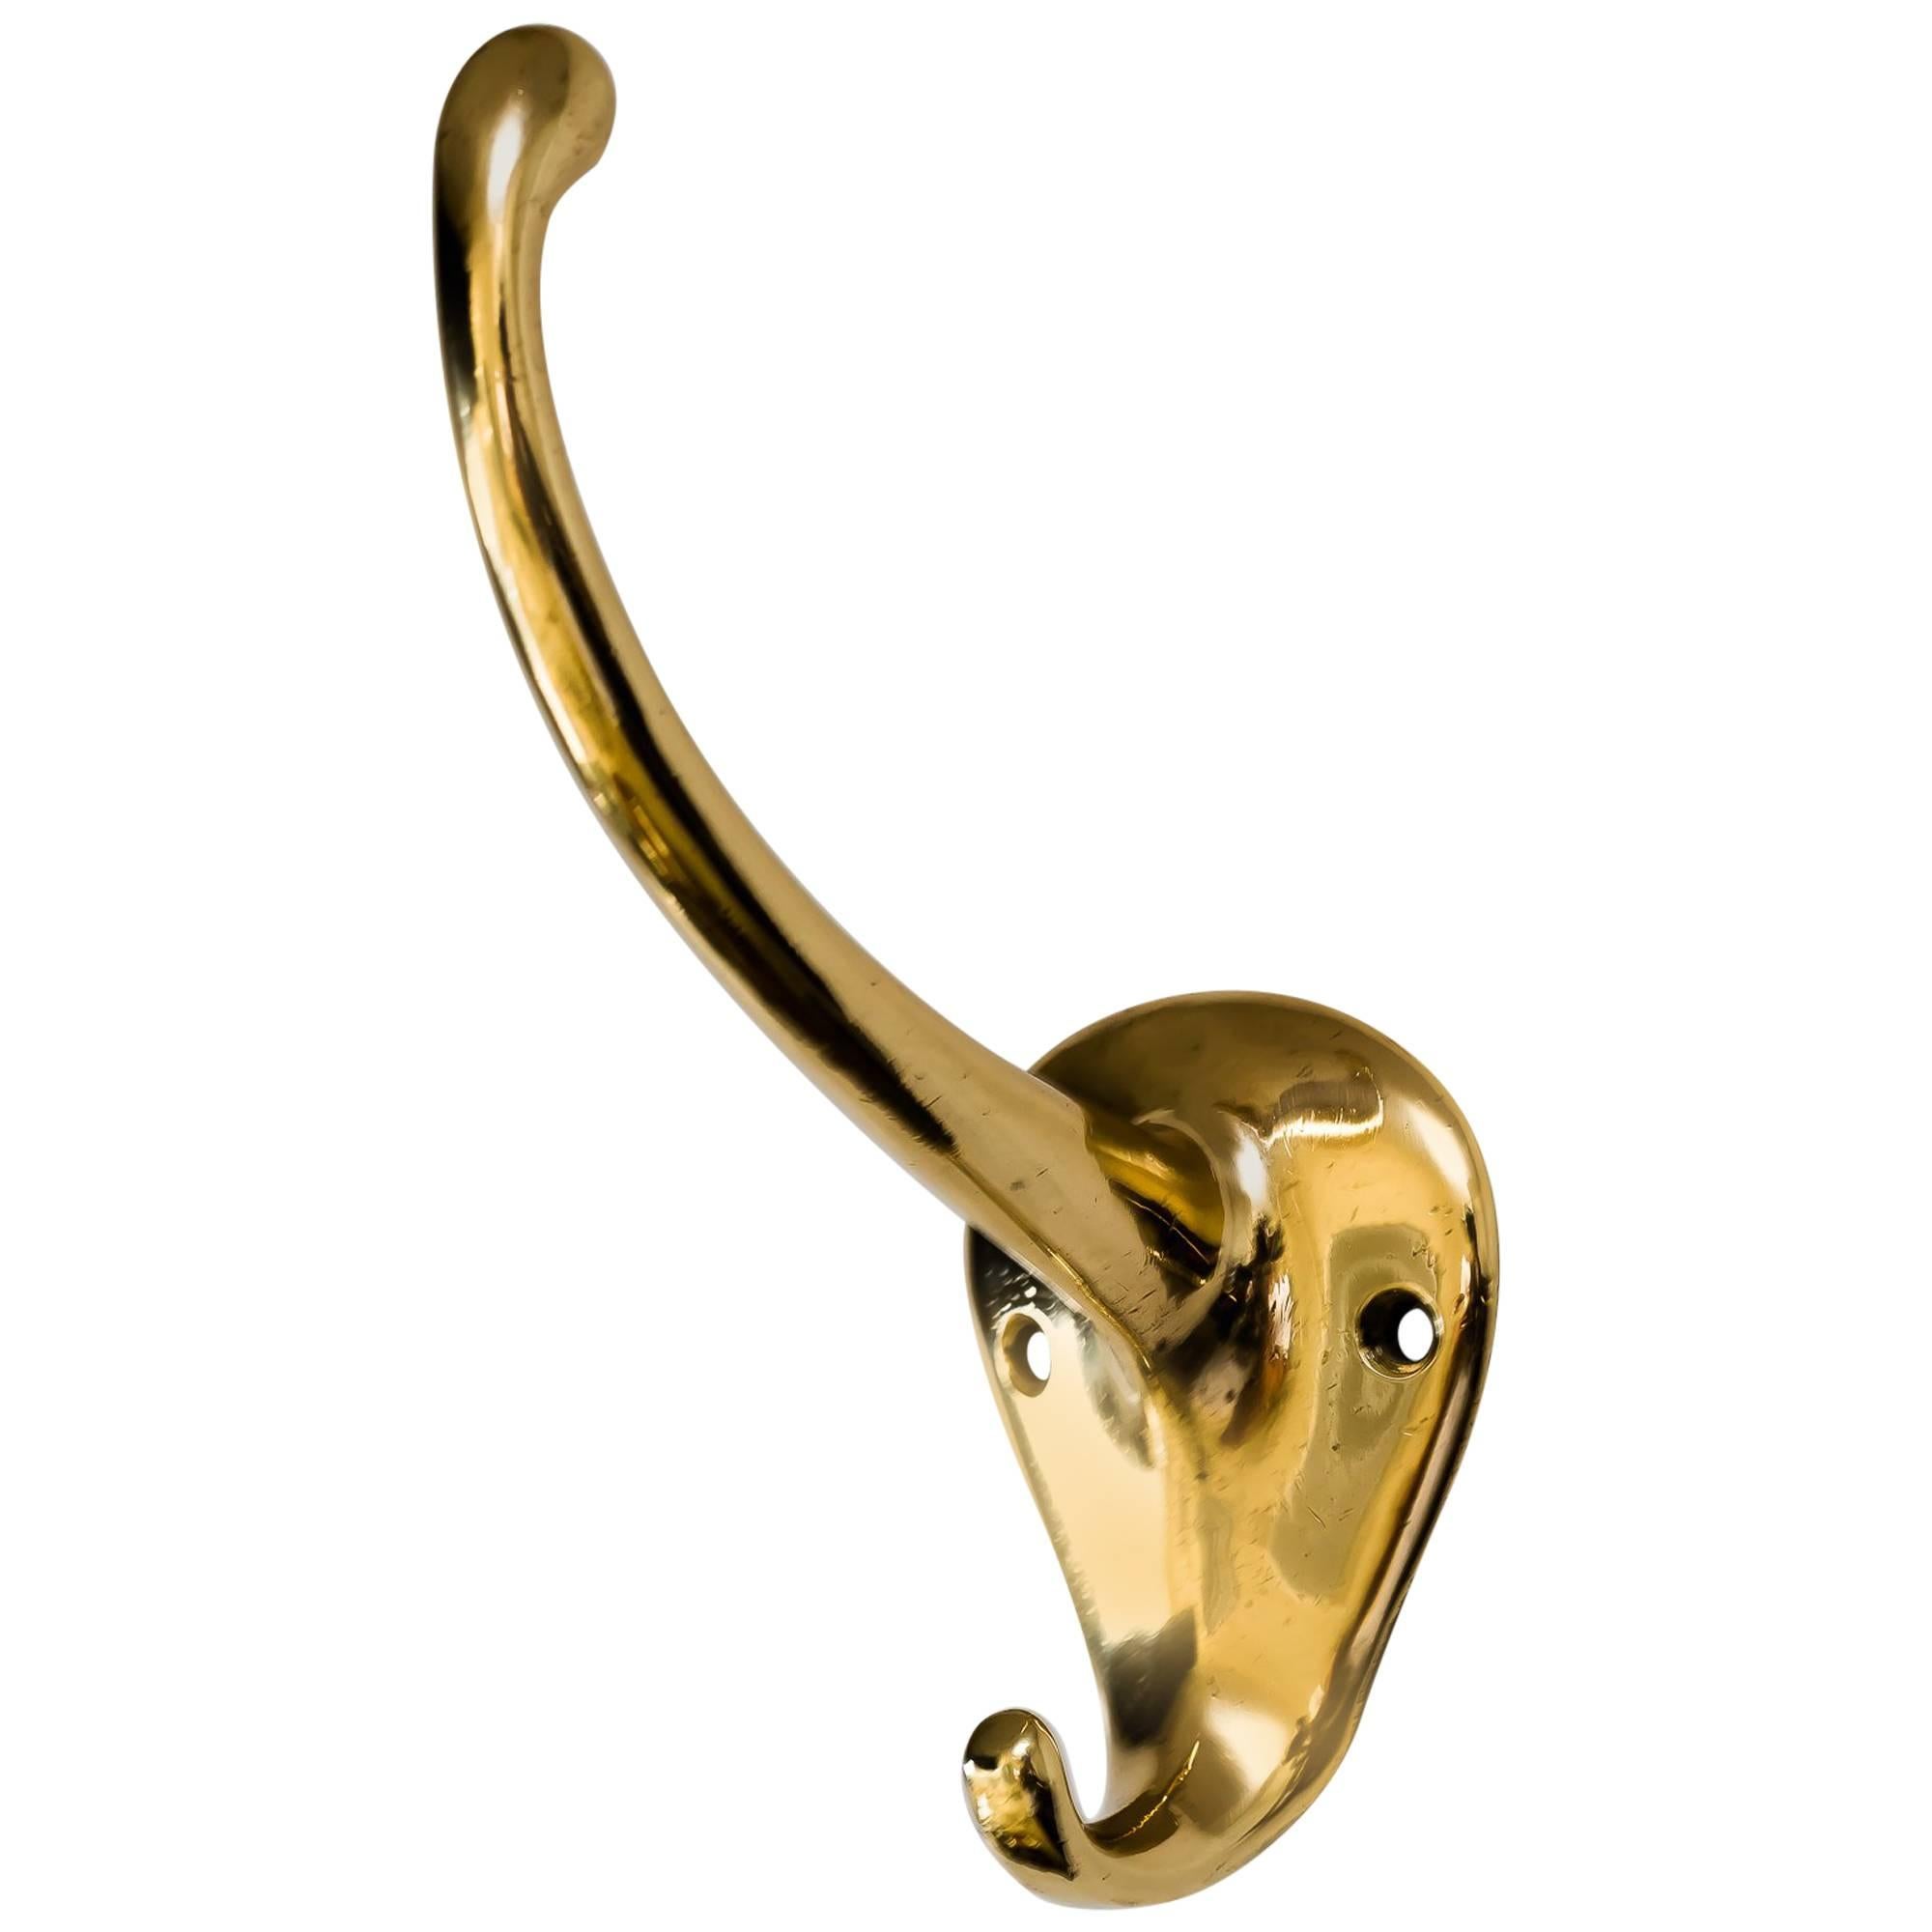 Wall Hook Attributed to Adolf Loos